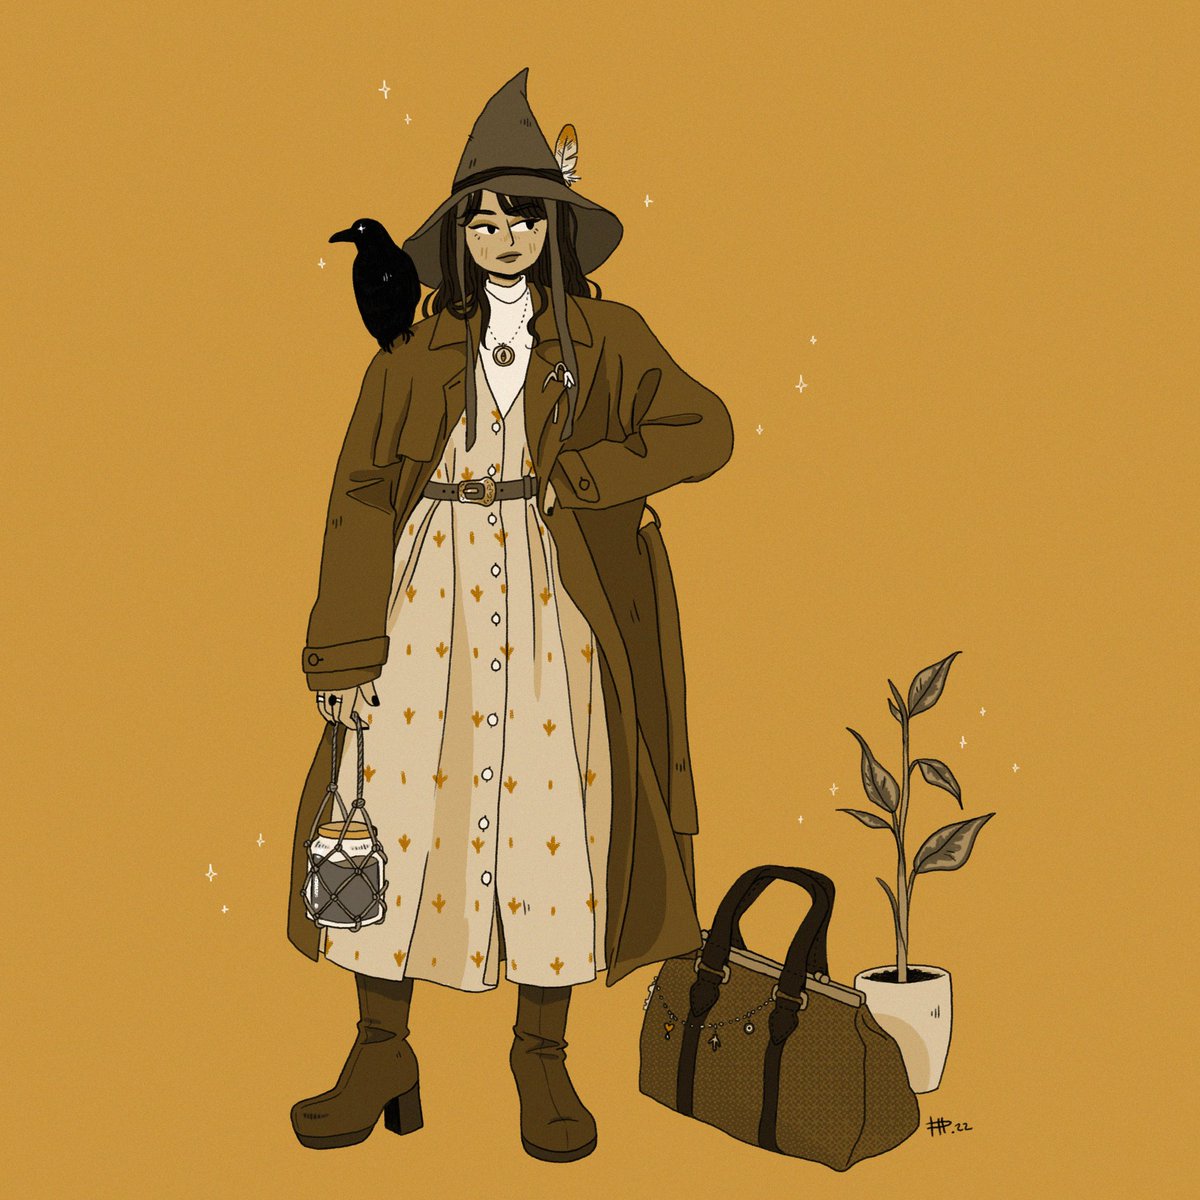 Waiting for her ride... Witchtober 3: Travel #willowwitchtober #witchtober #Drawtober2022 #illustration